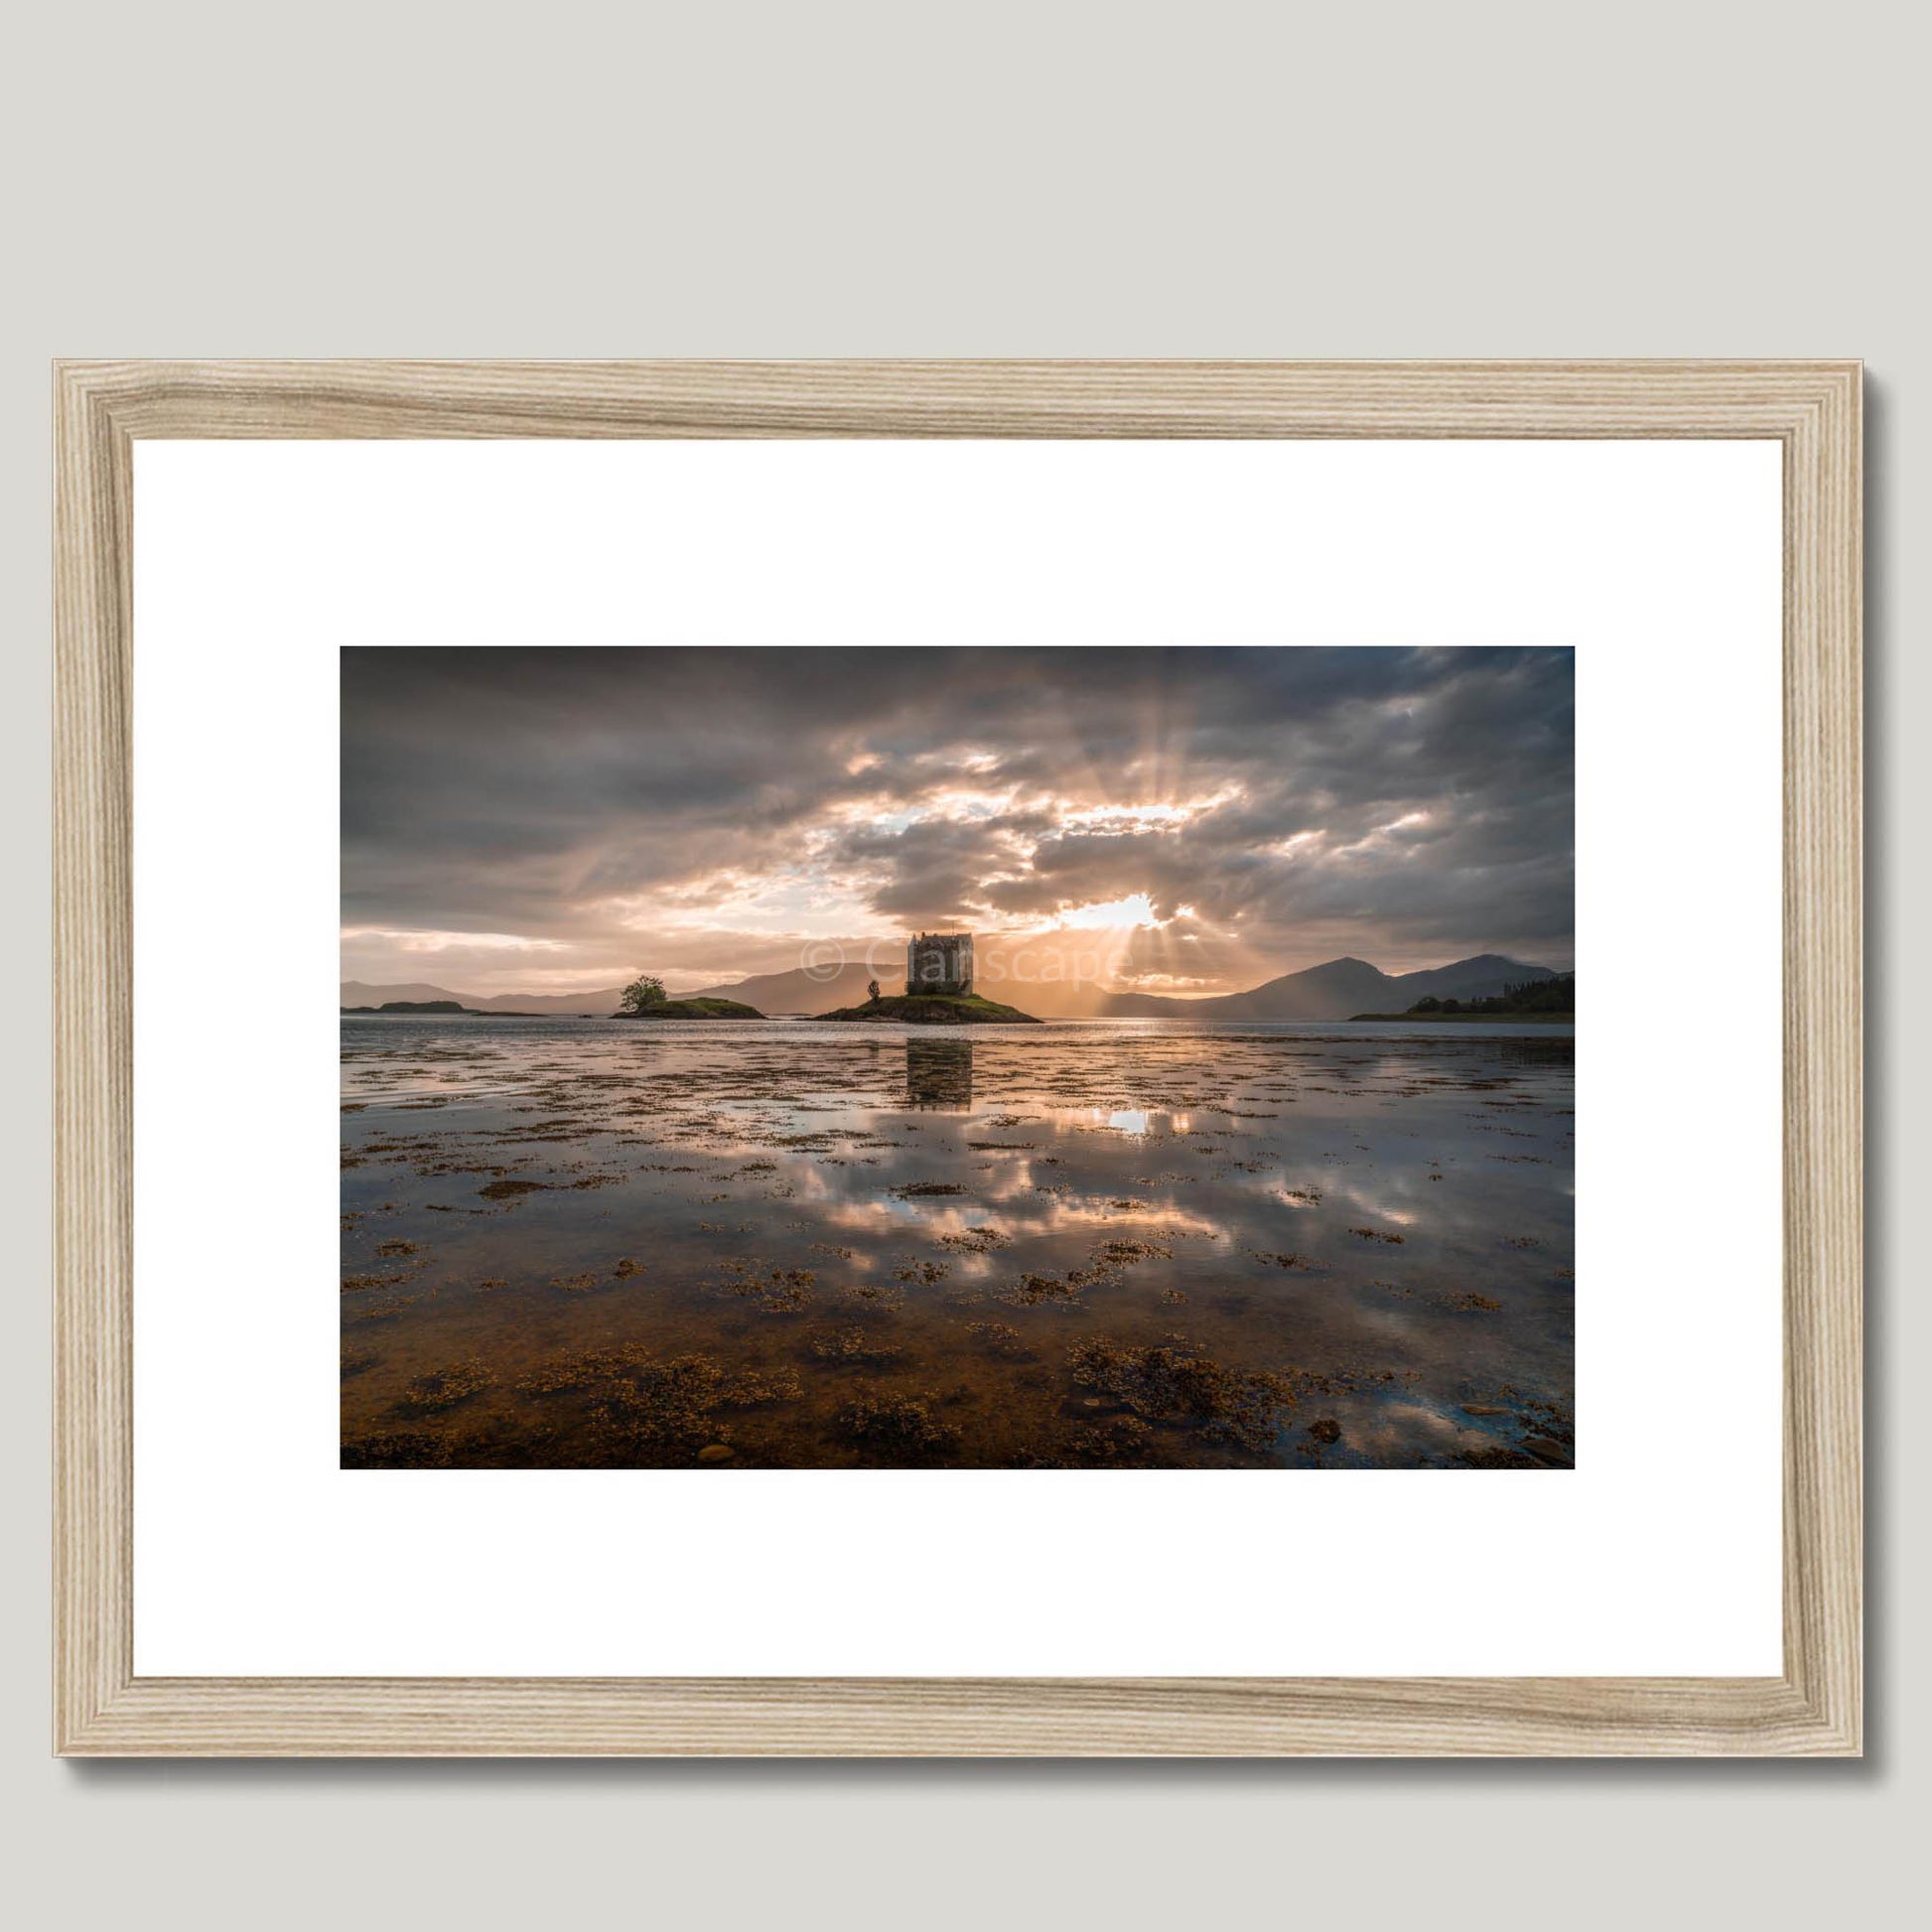 Clan Stewart of Appin - Castle Stalker - Framed & Mounted Photo Print 16"x12" Natural